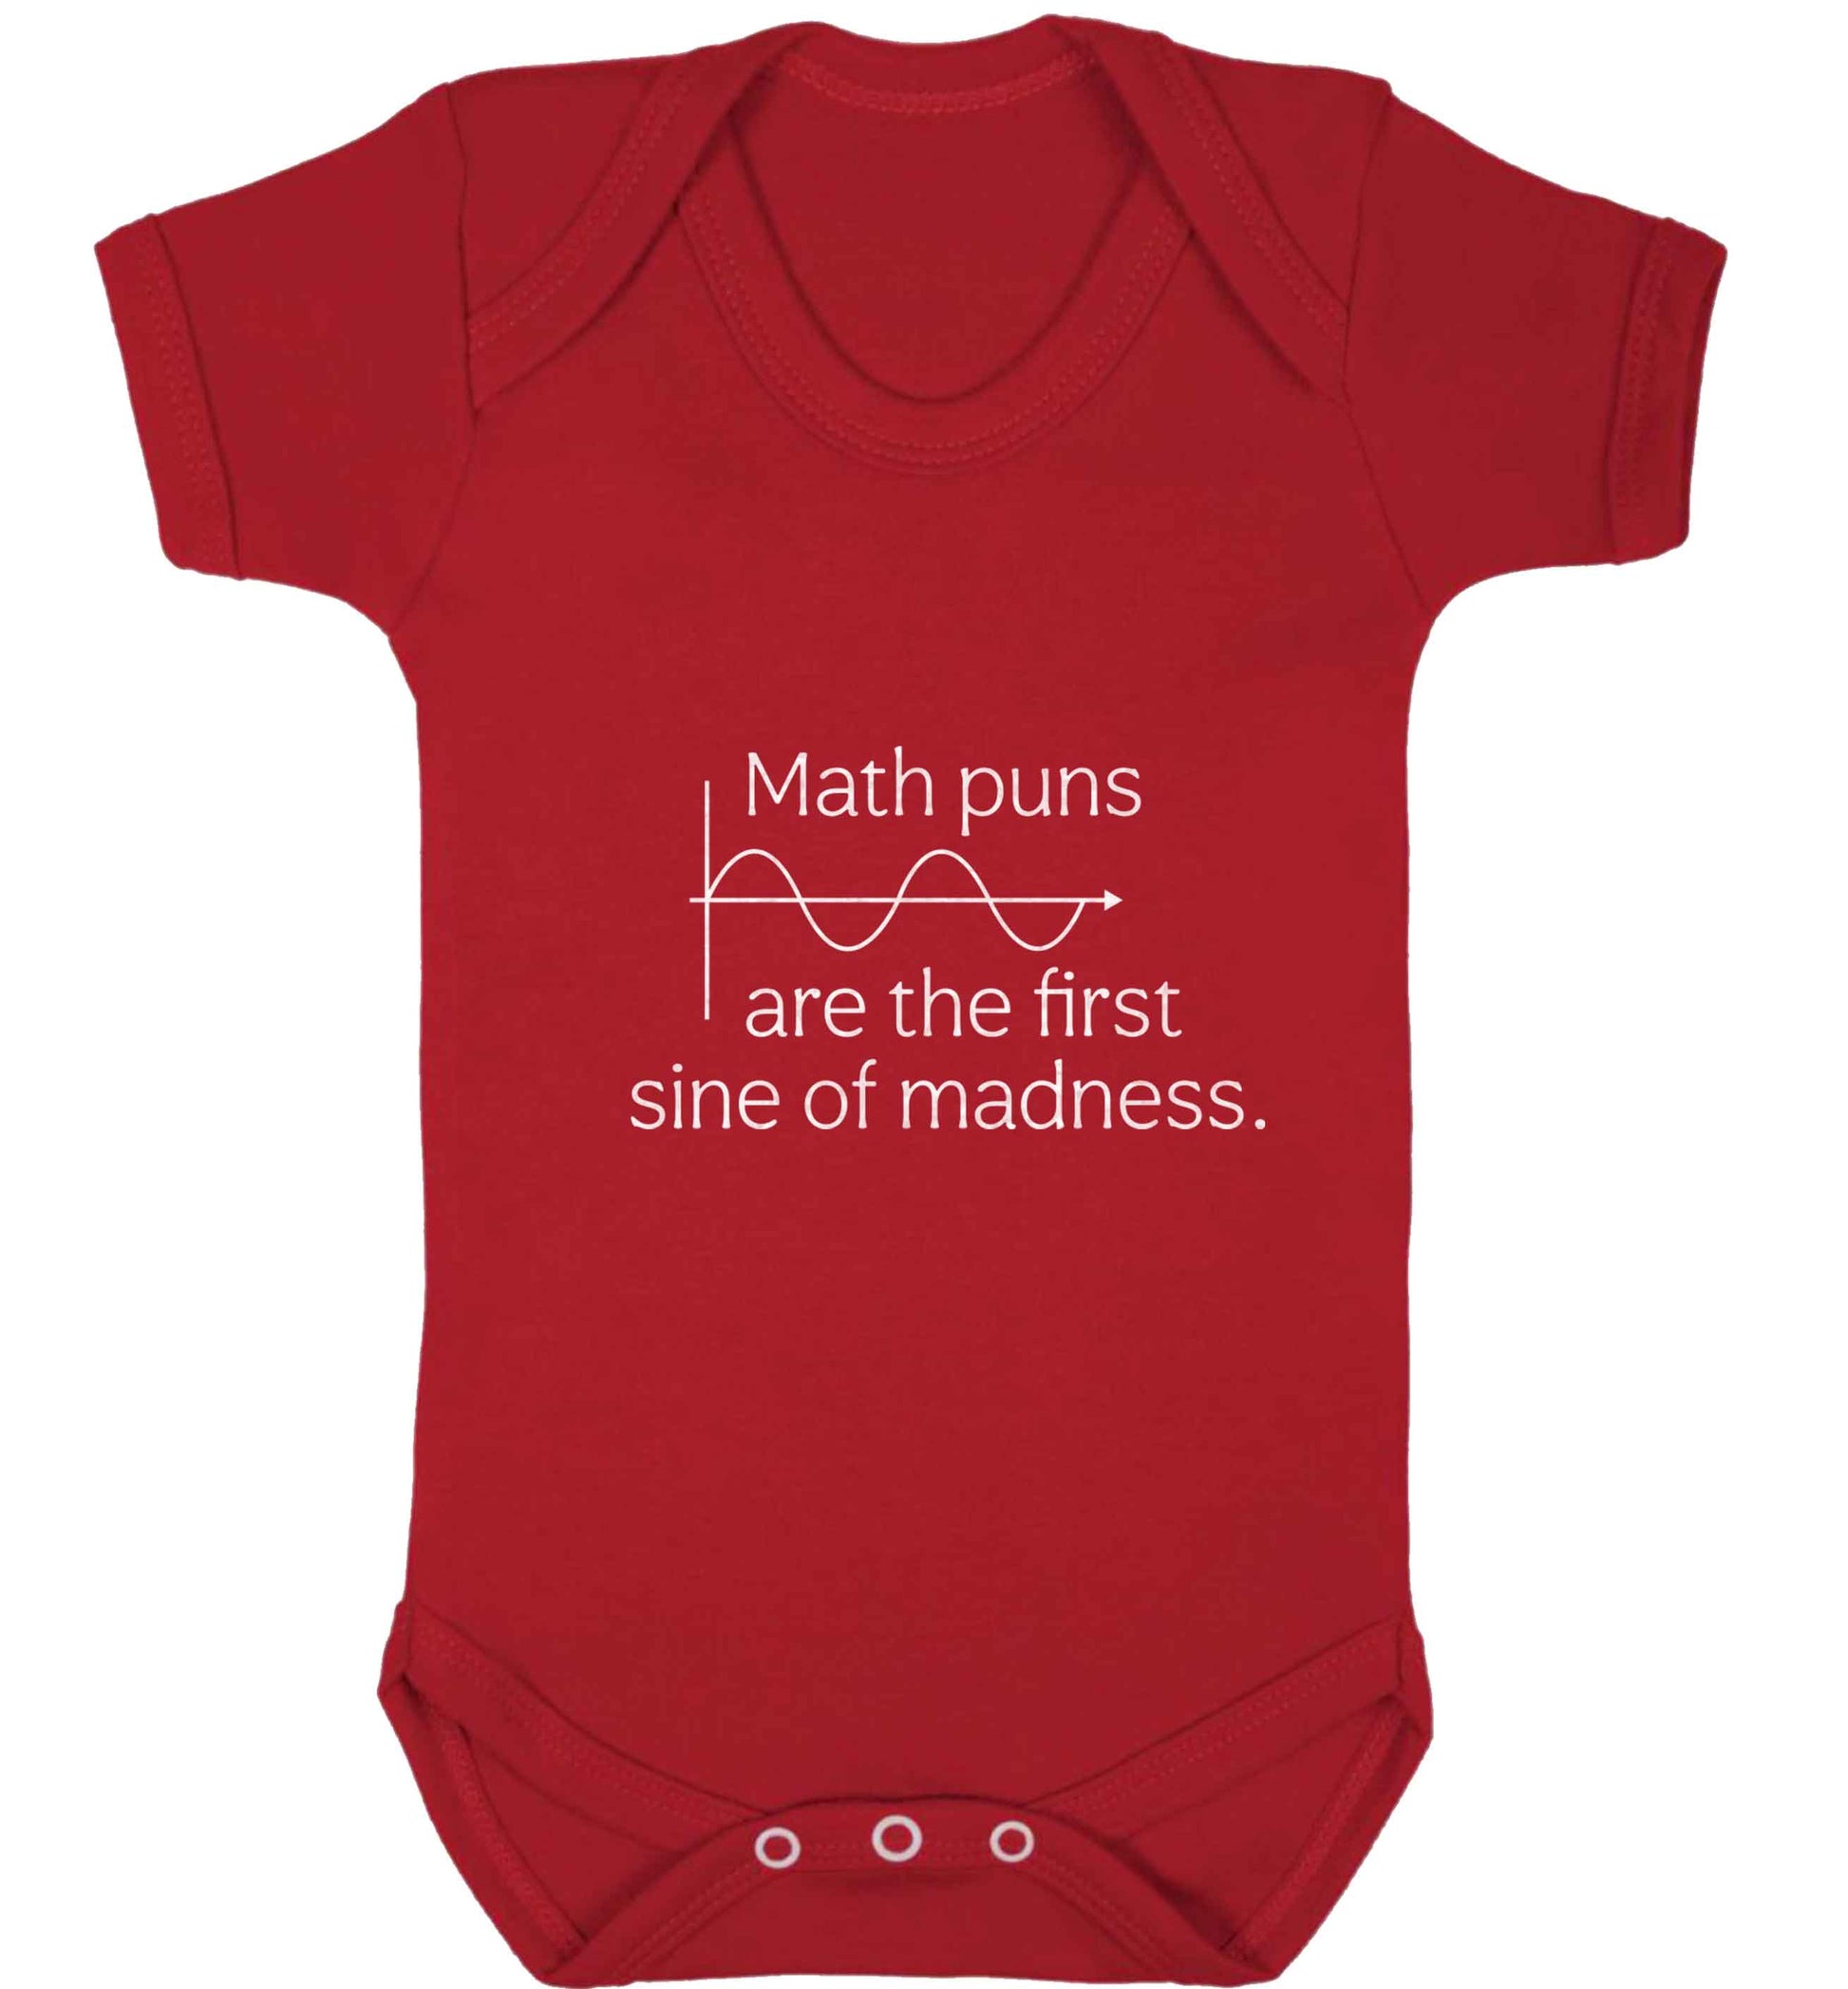 Math puns are the first sine of madness baby vest red 18-24 months